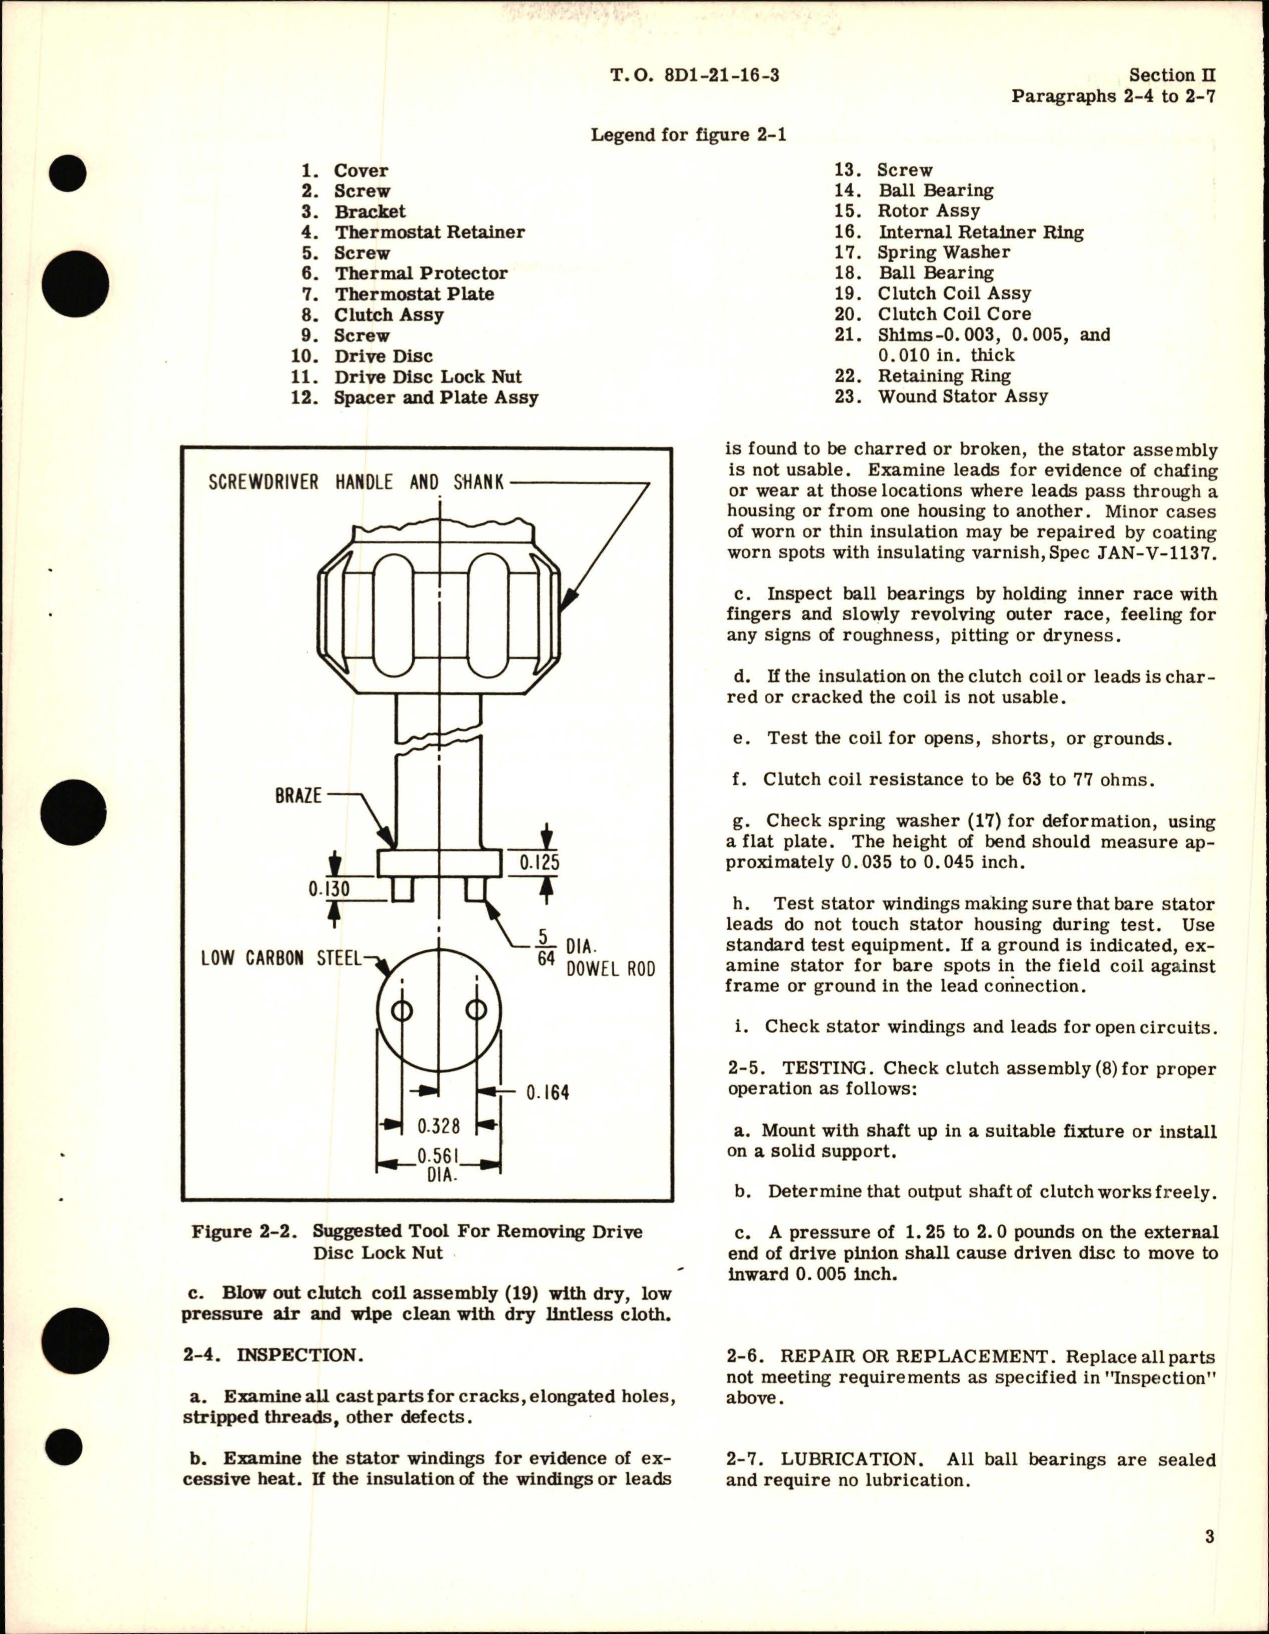 Sample page 5 from AirCorps Library document: Overhaul Instructions for Fractional Horsepower Electric Motors P Frame Series 